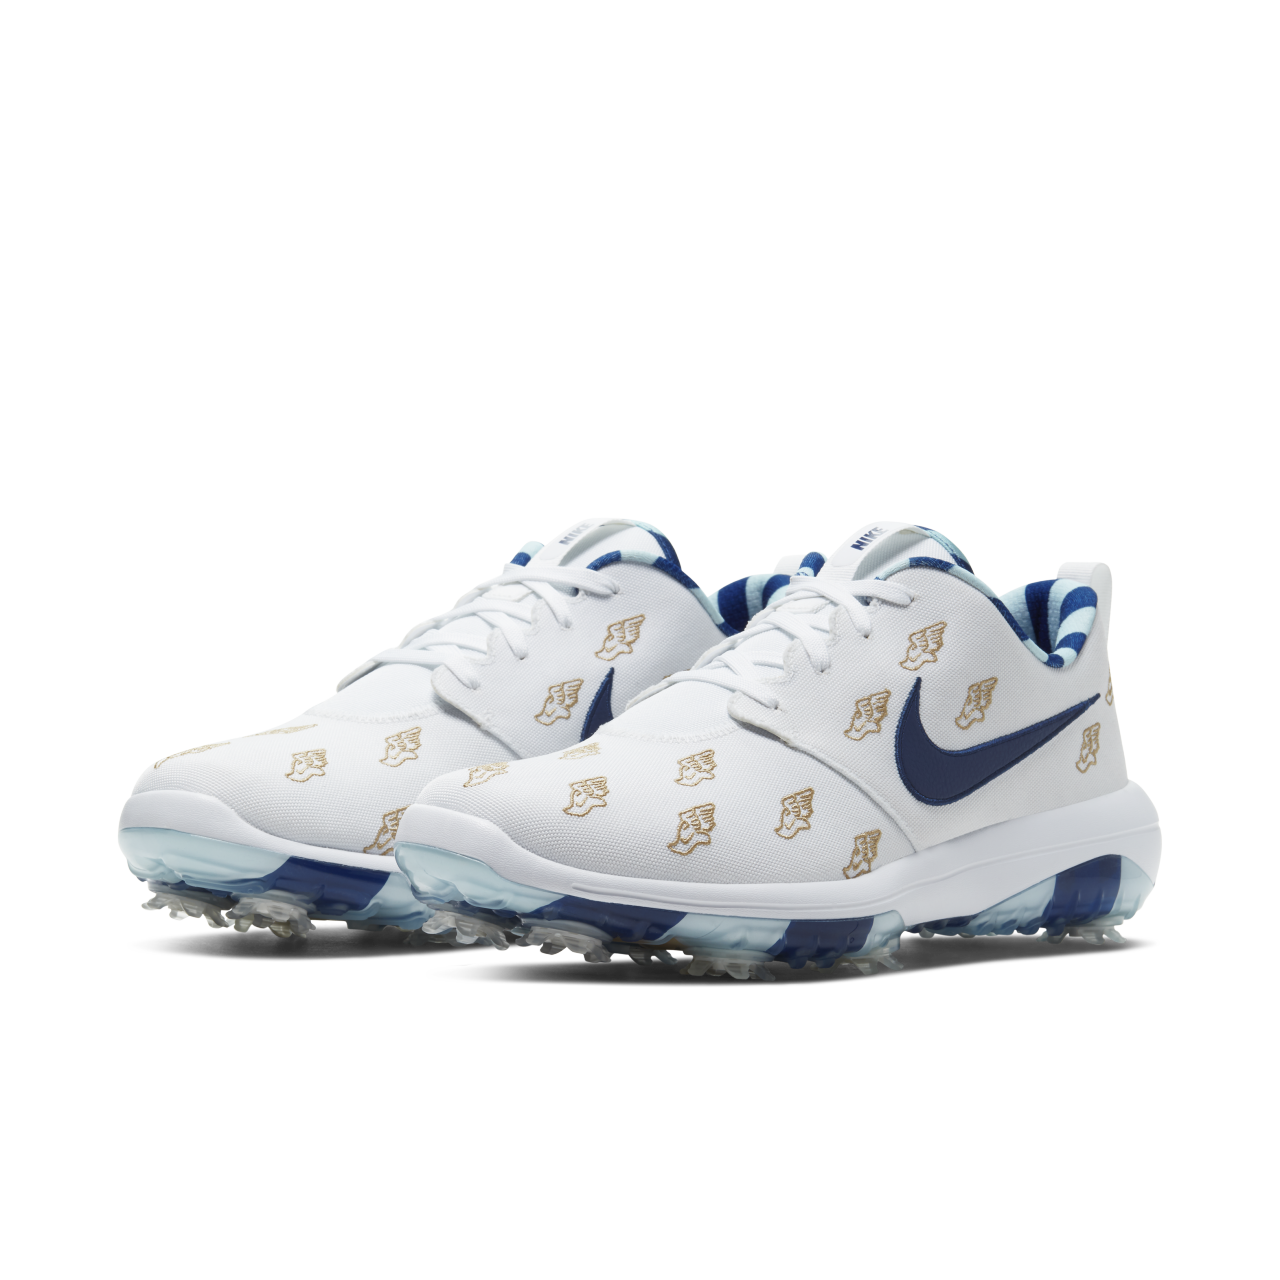 nike golf shoes winged foot